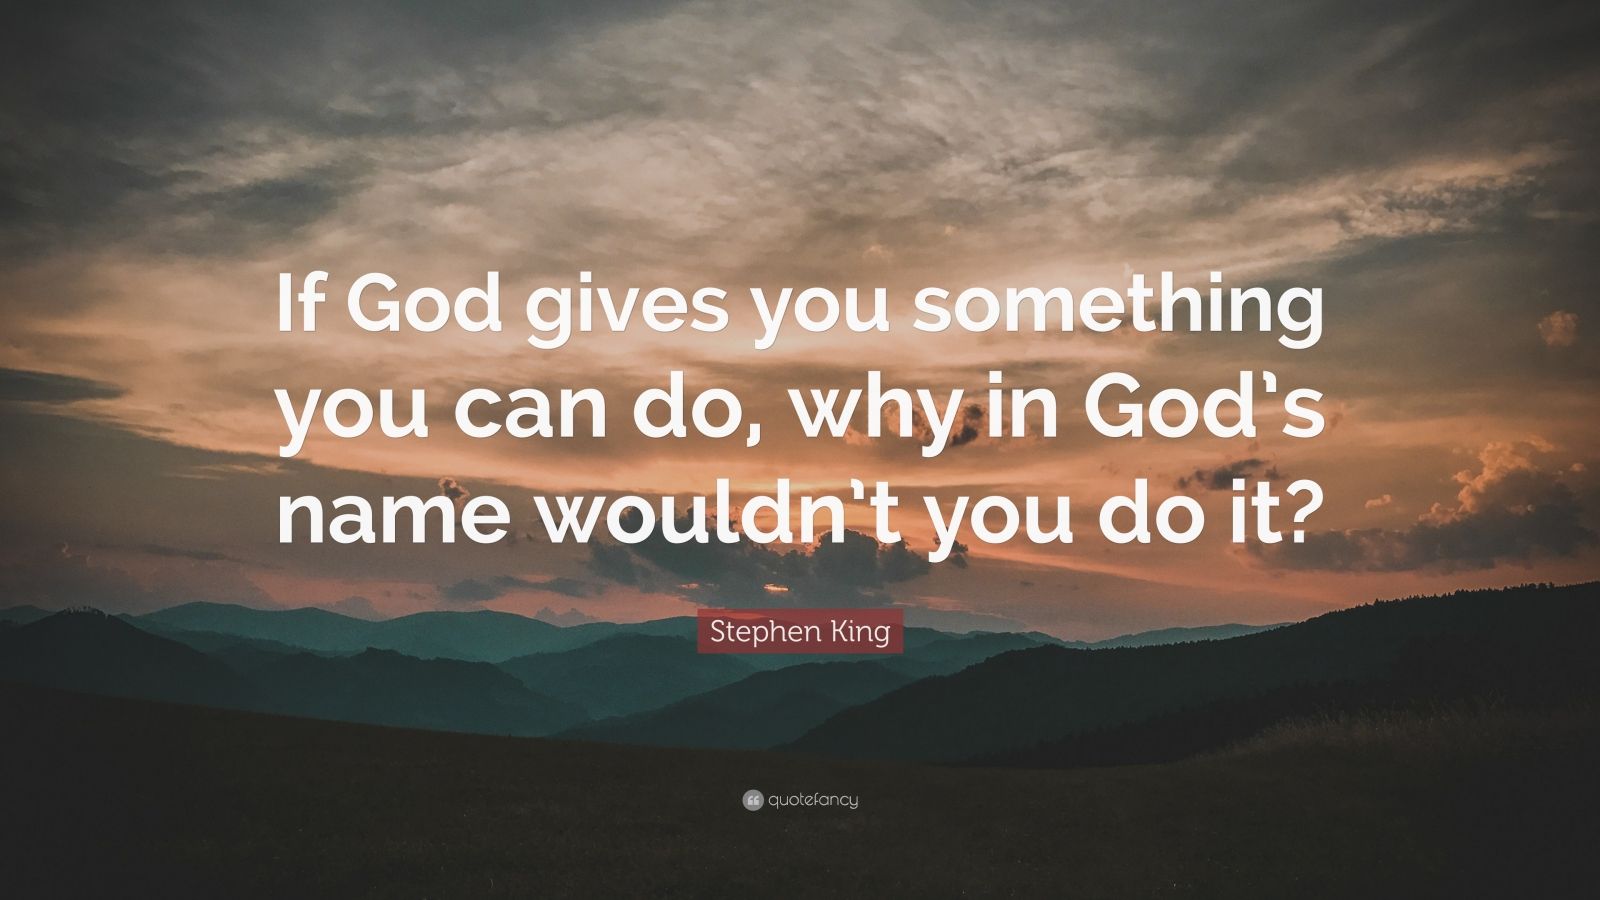 Stephen King Quote: "If God gives you something you can do, why in God's name wouldn't you do it ...